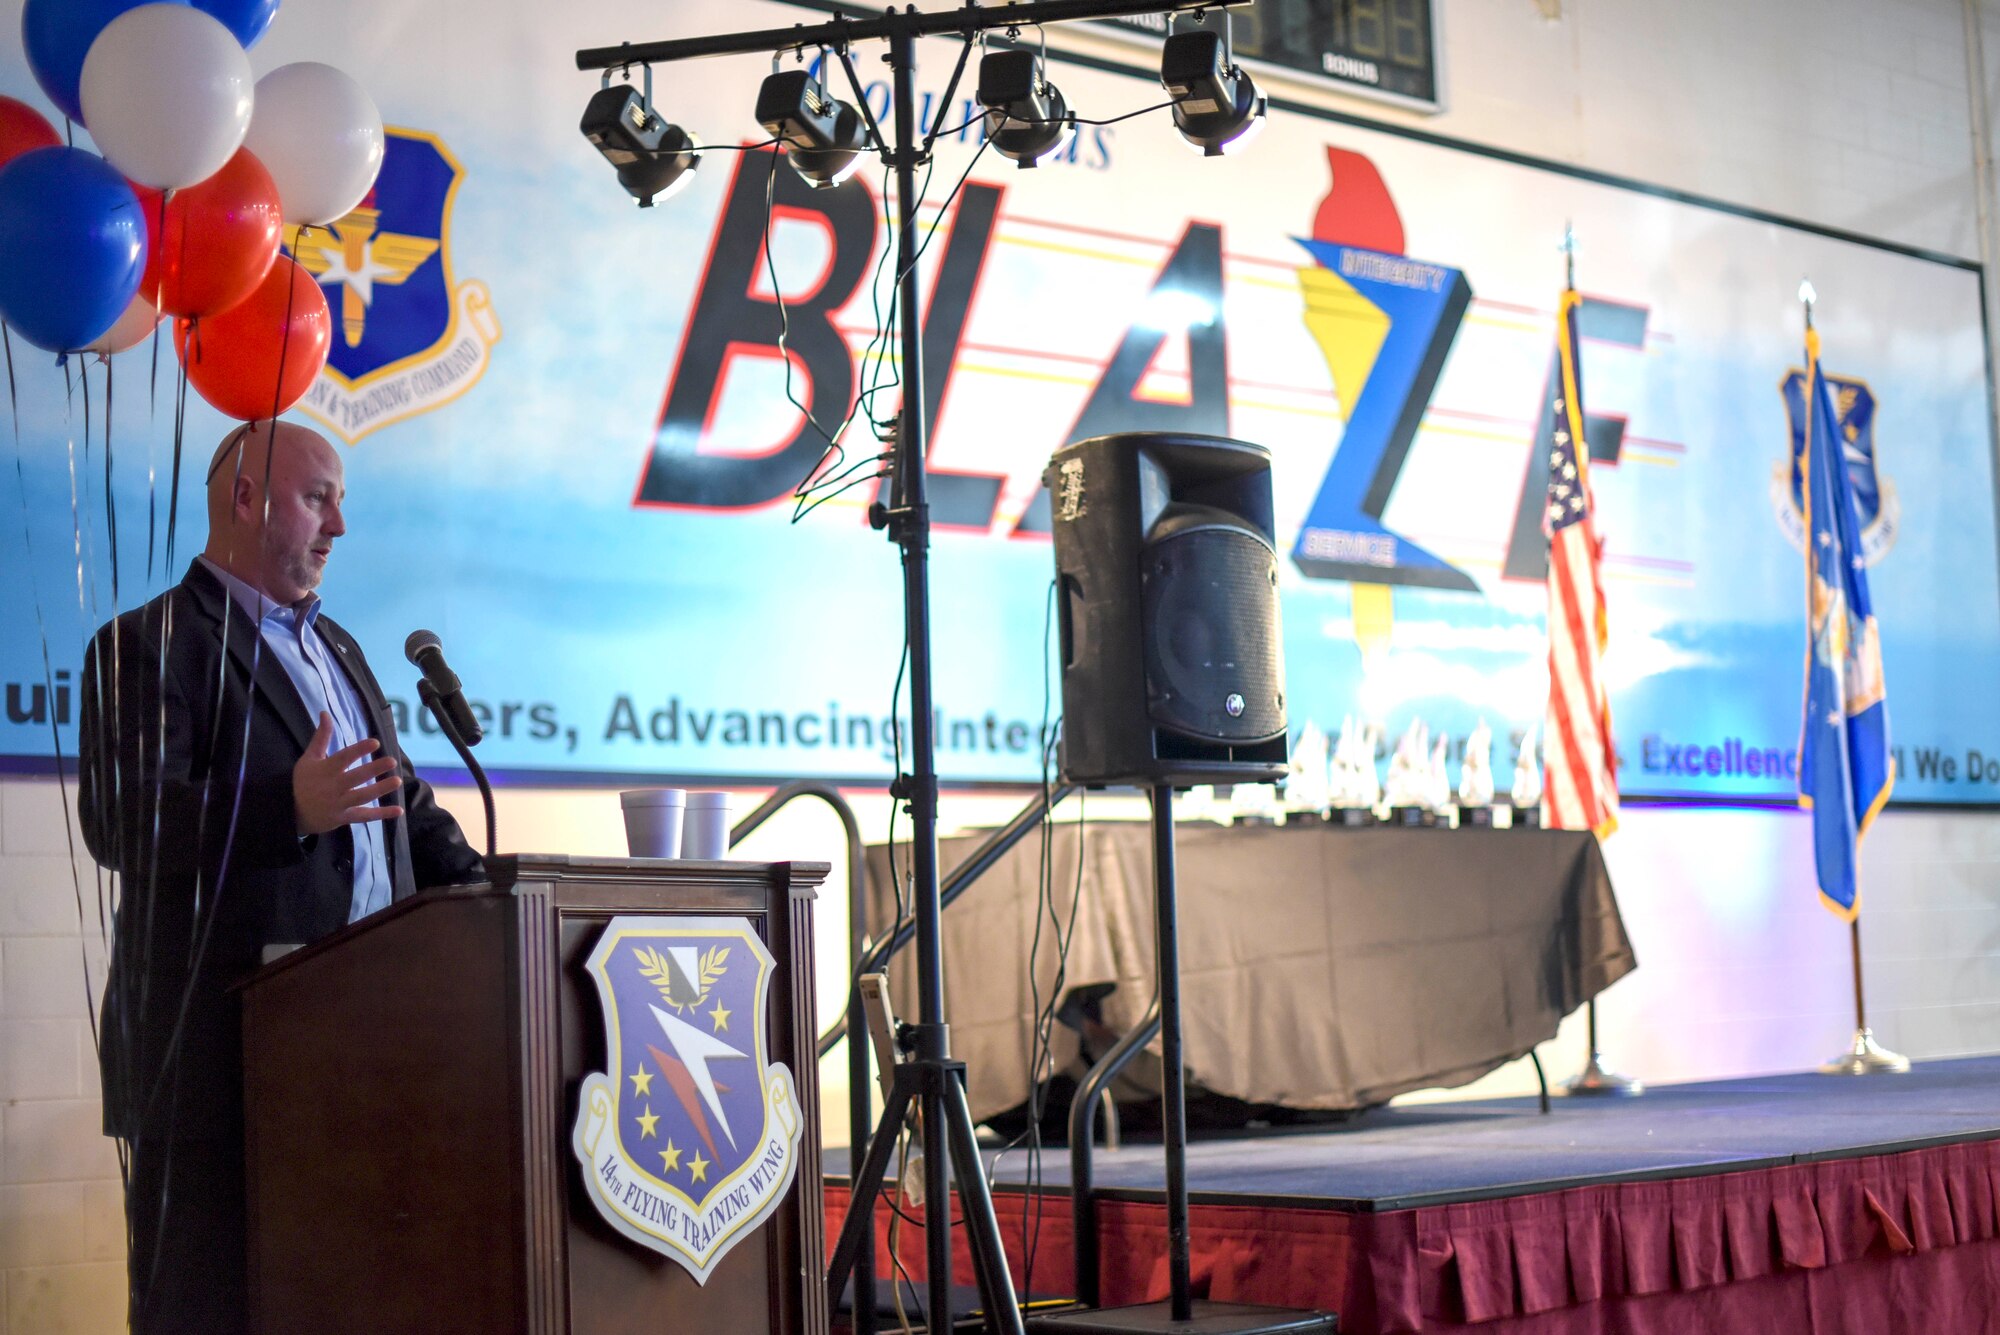 Jason Trufant, Mississippi University for Women’s athletics director, speaks at the 2019 14th Flying Training Wing’s Annual Awards Banquet Feb. 9, 2020, on Columbus Air Force Base, Miss. Trufant is the son and grandson of U.S. Air Force veterans and a community member involved with Team BLAZE. (U.S. Air Force photo by Senior Airman Keith Holcomb)